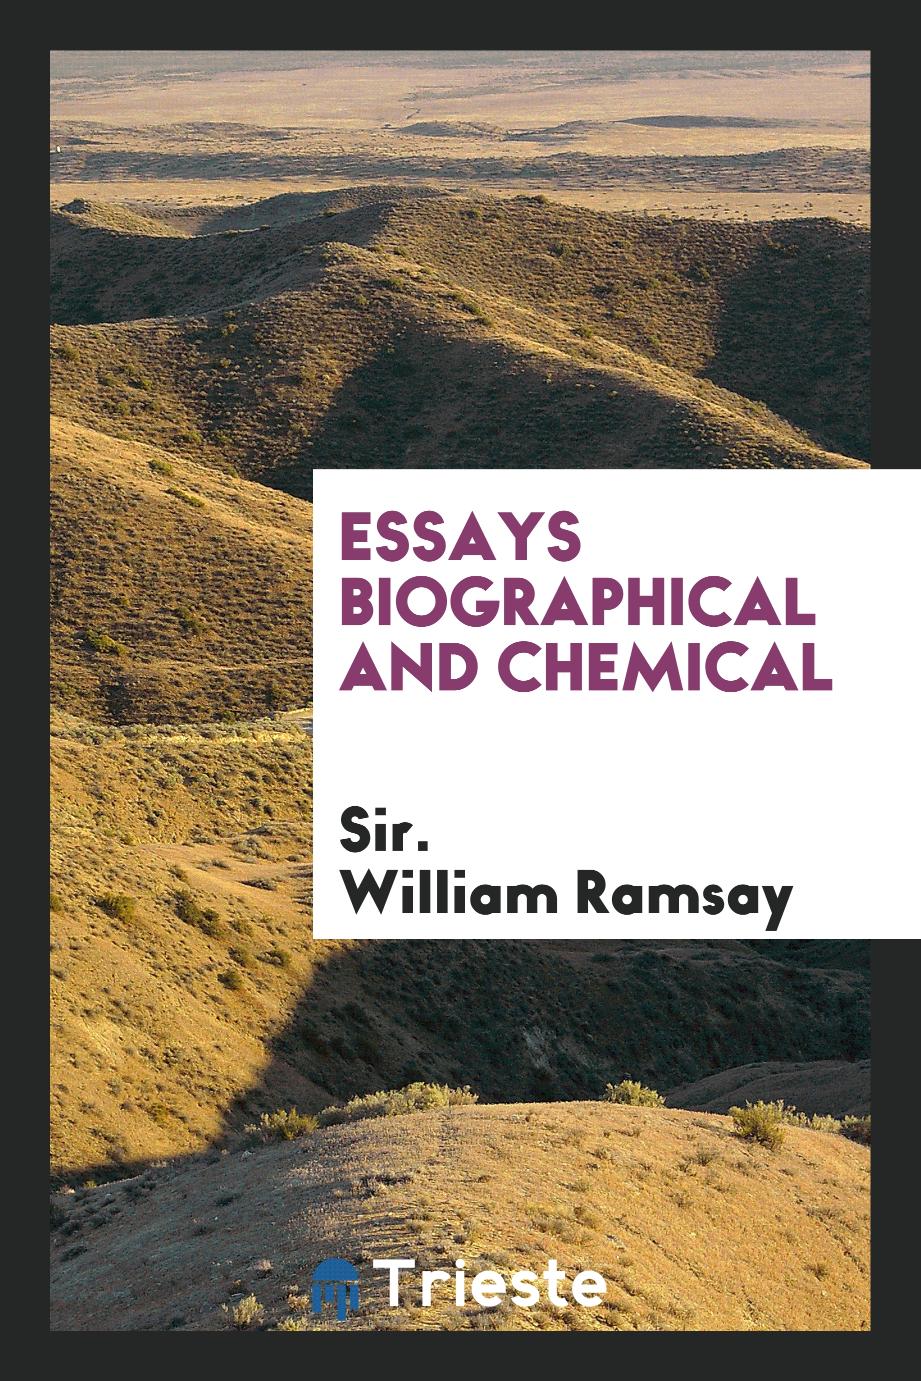 Essays biographical and chemical